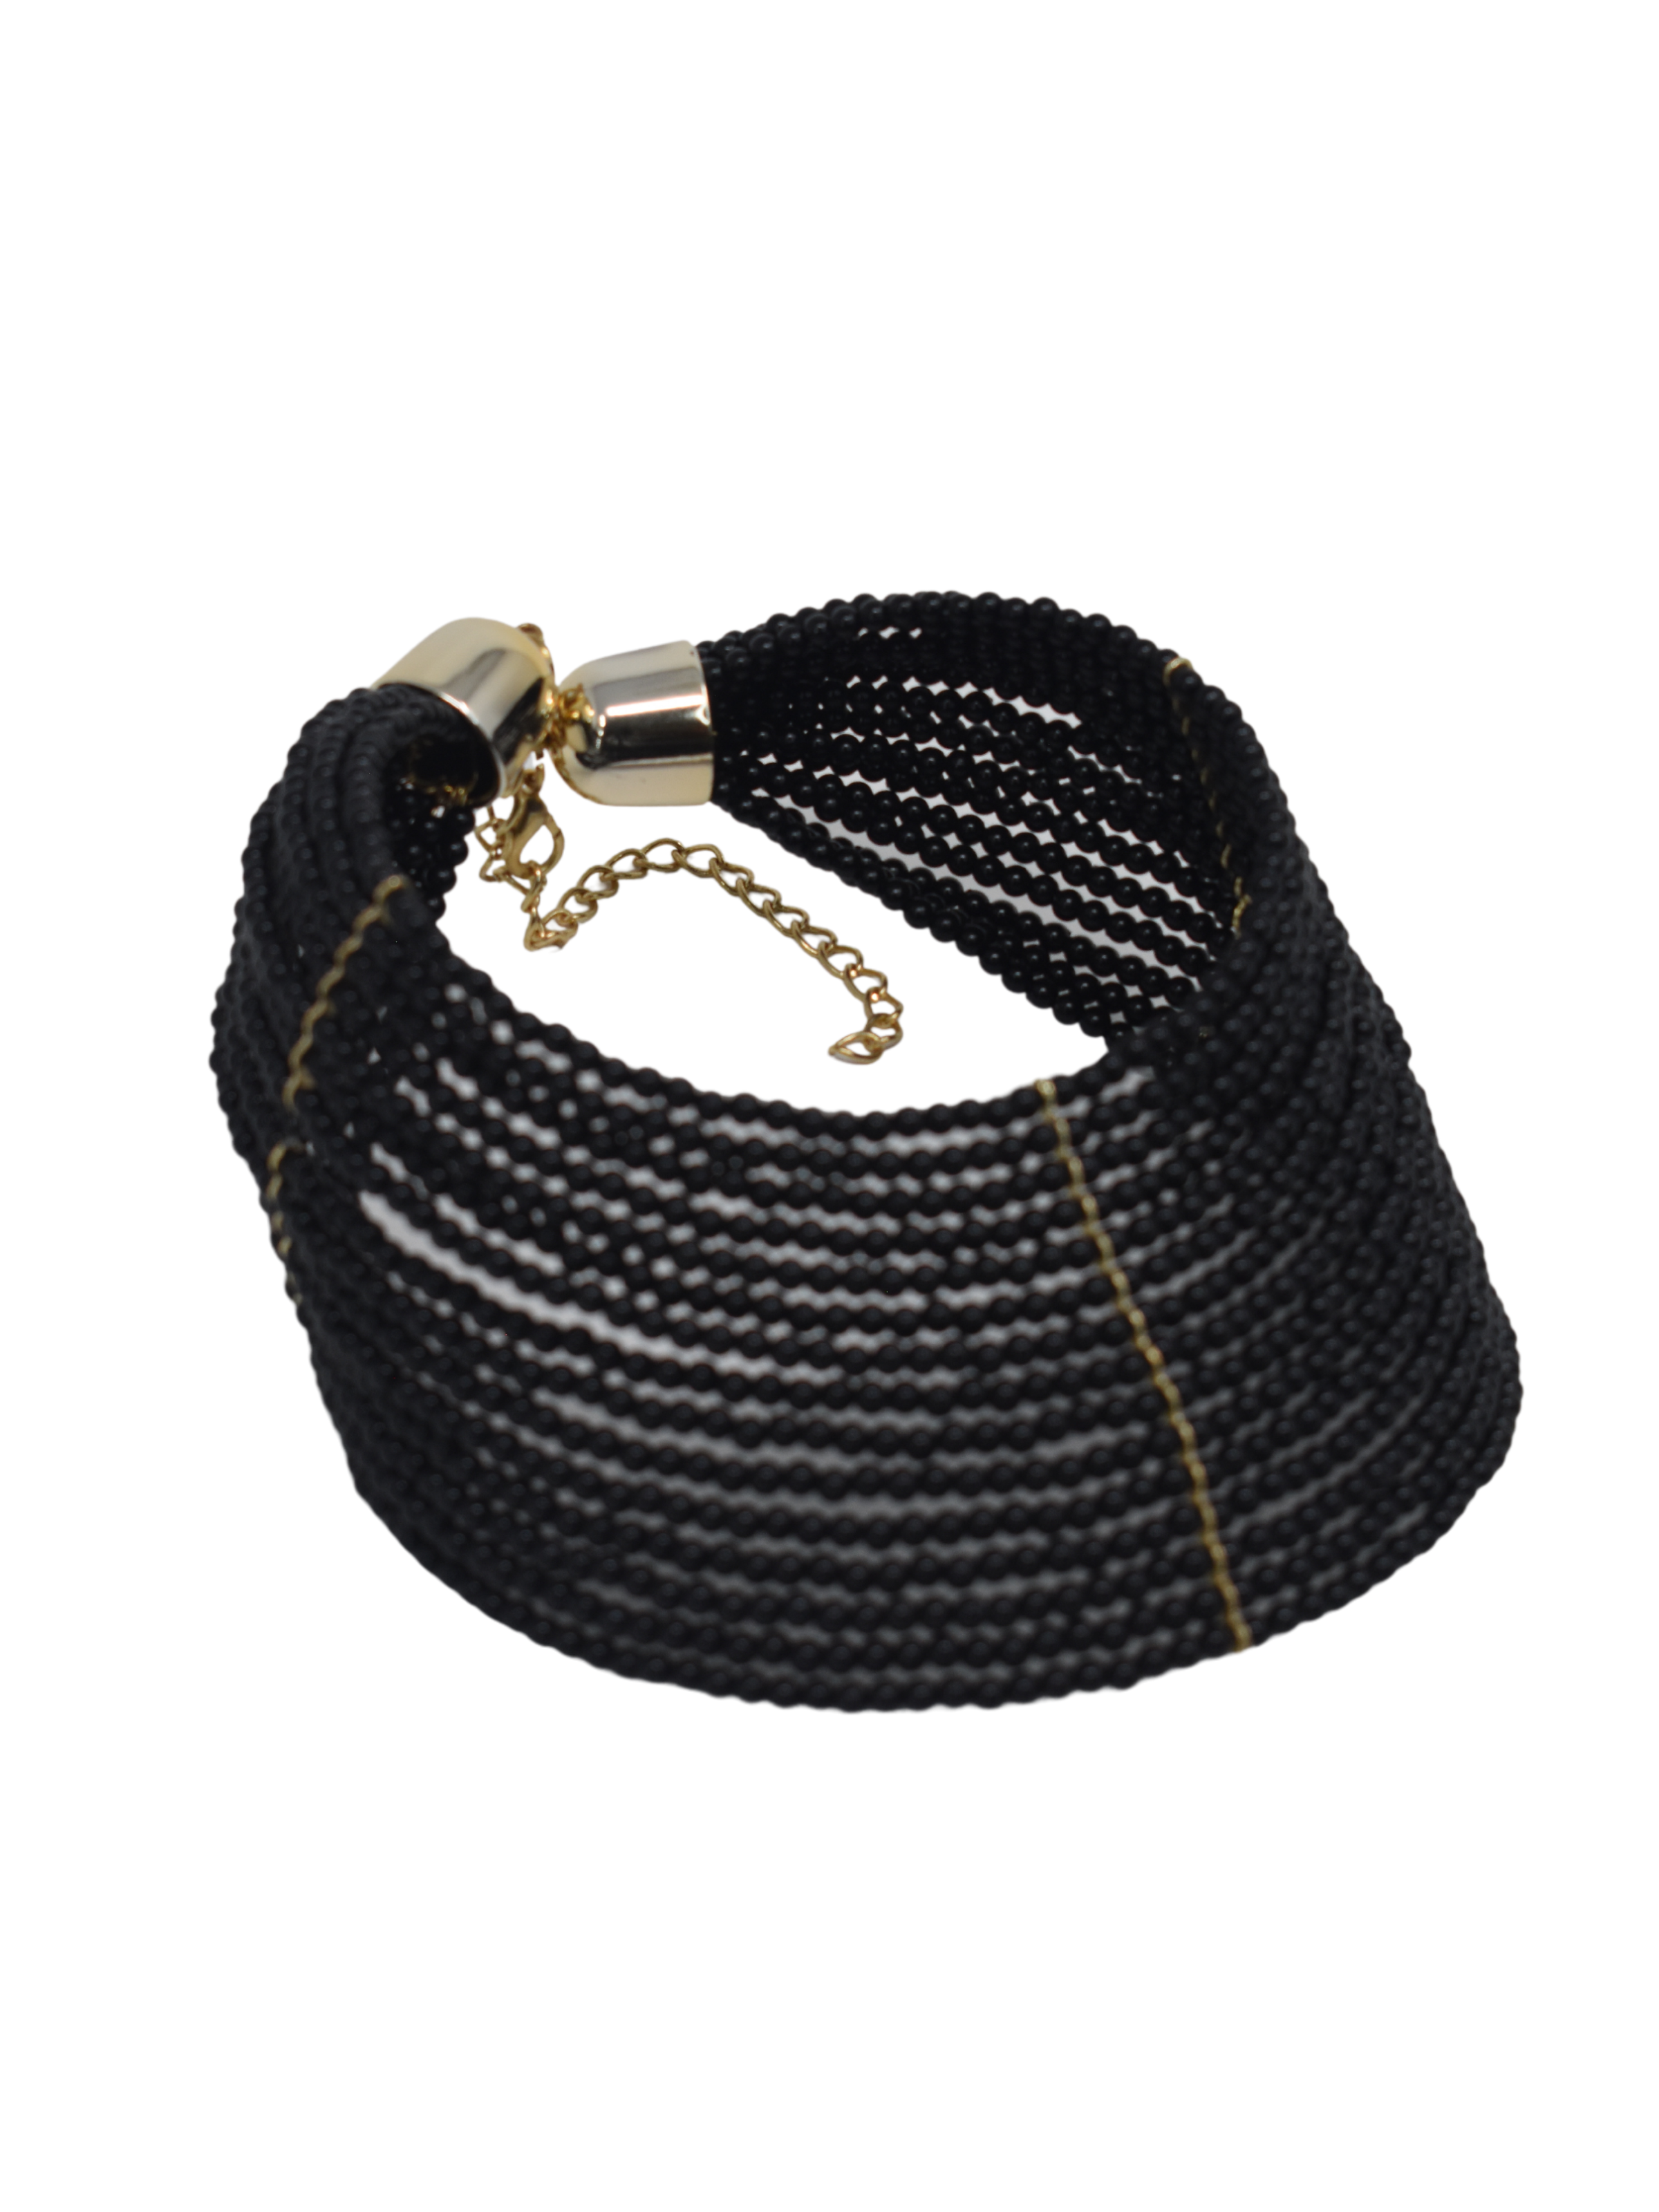 The fashion greats will be proud once they see you in our Aurora beaded black choker necklace.